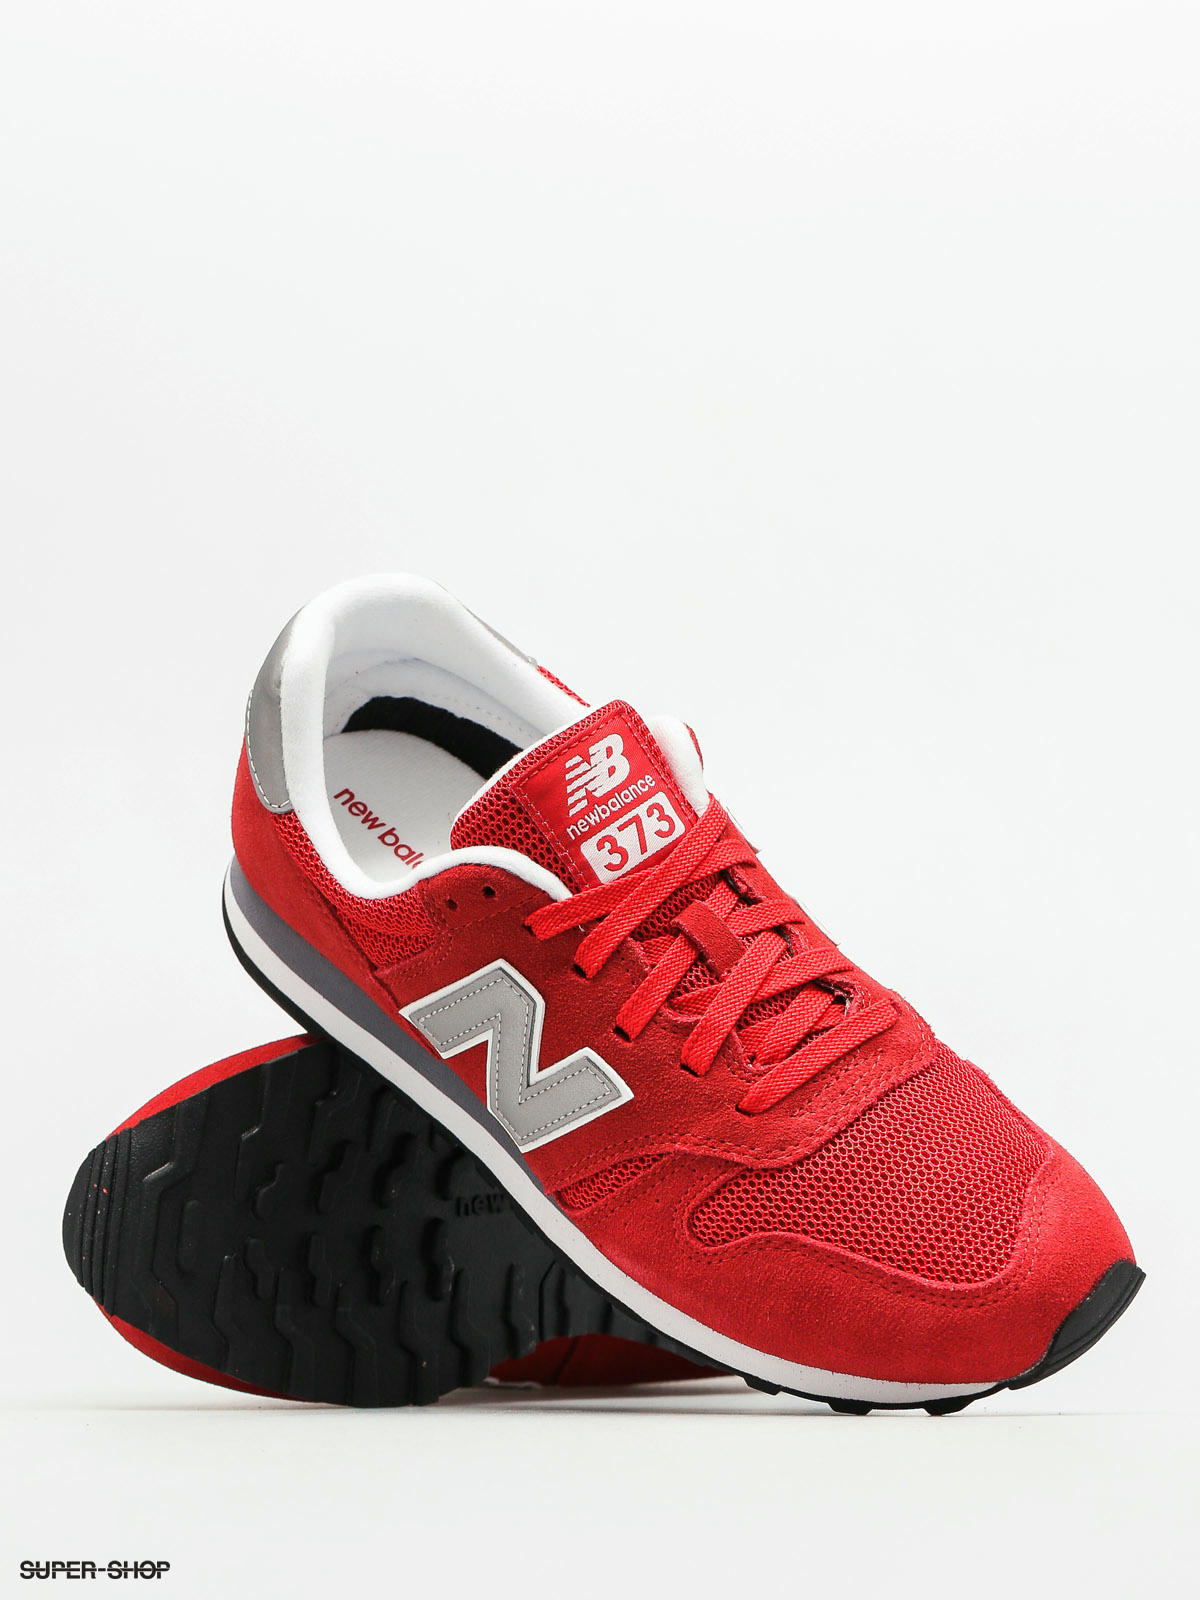 nb 373 red